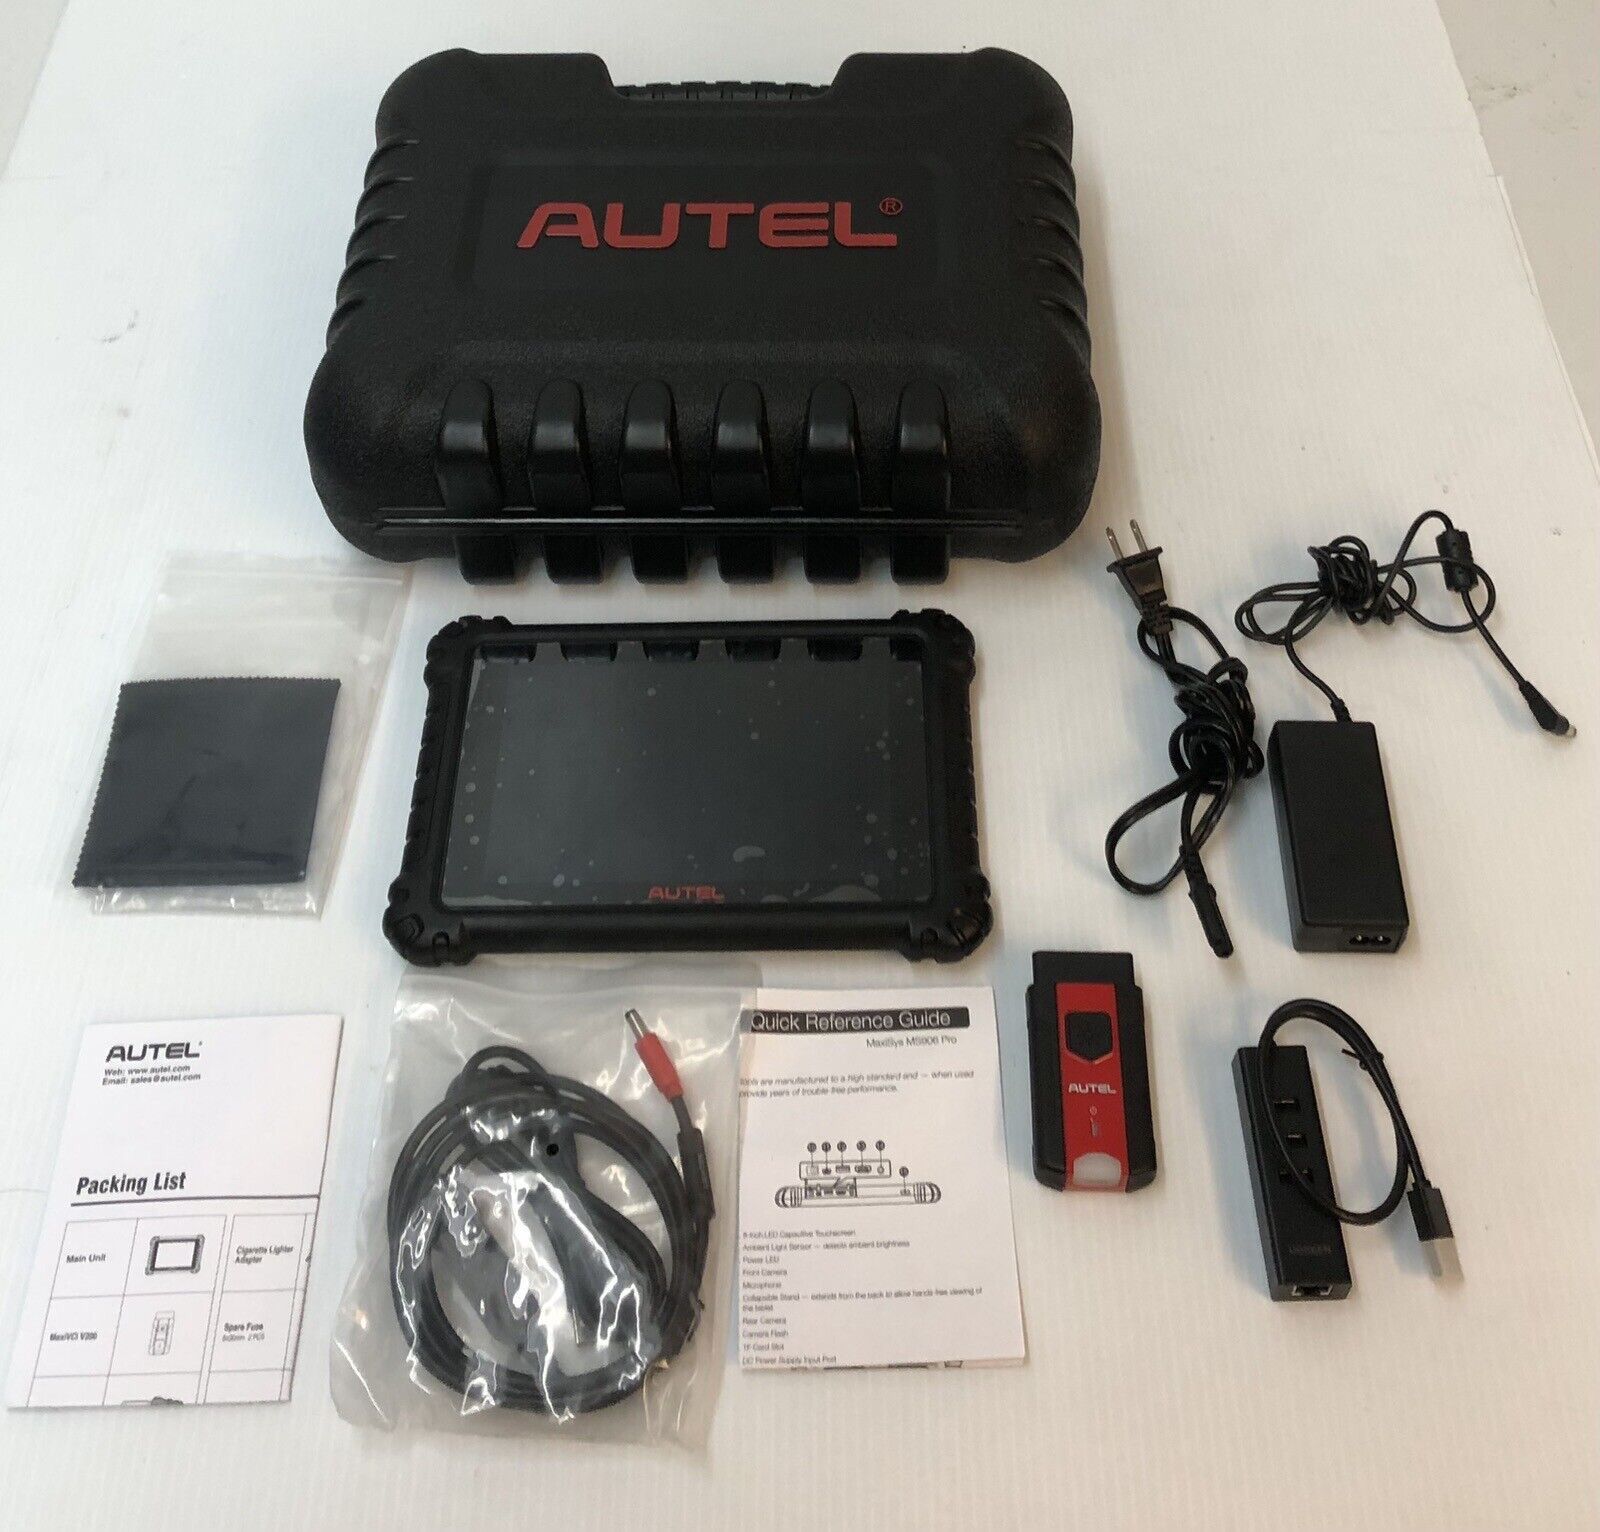 Autel Scanner MaxiSys MS906 Pro Automotive Scan Tool Bi-Directional Control